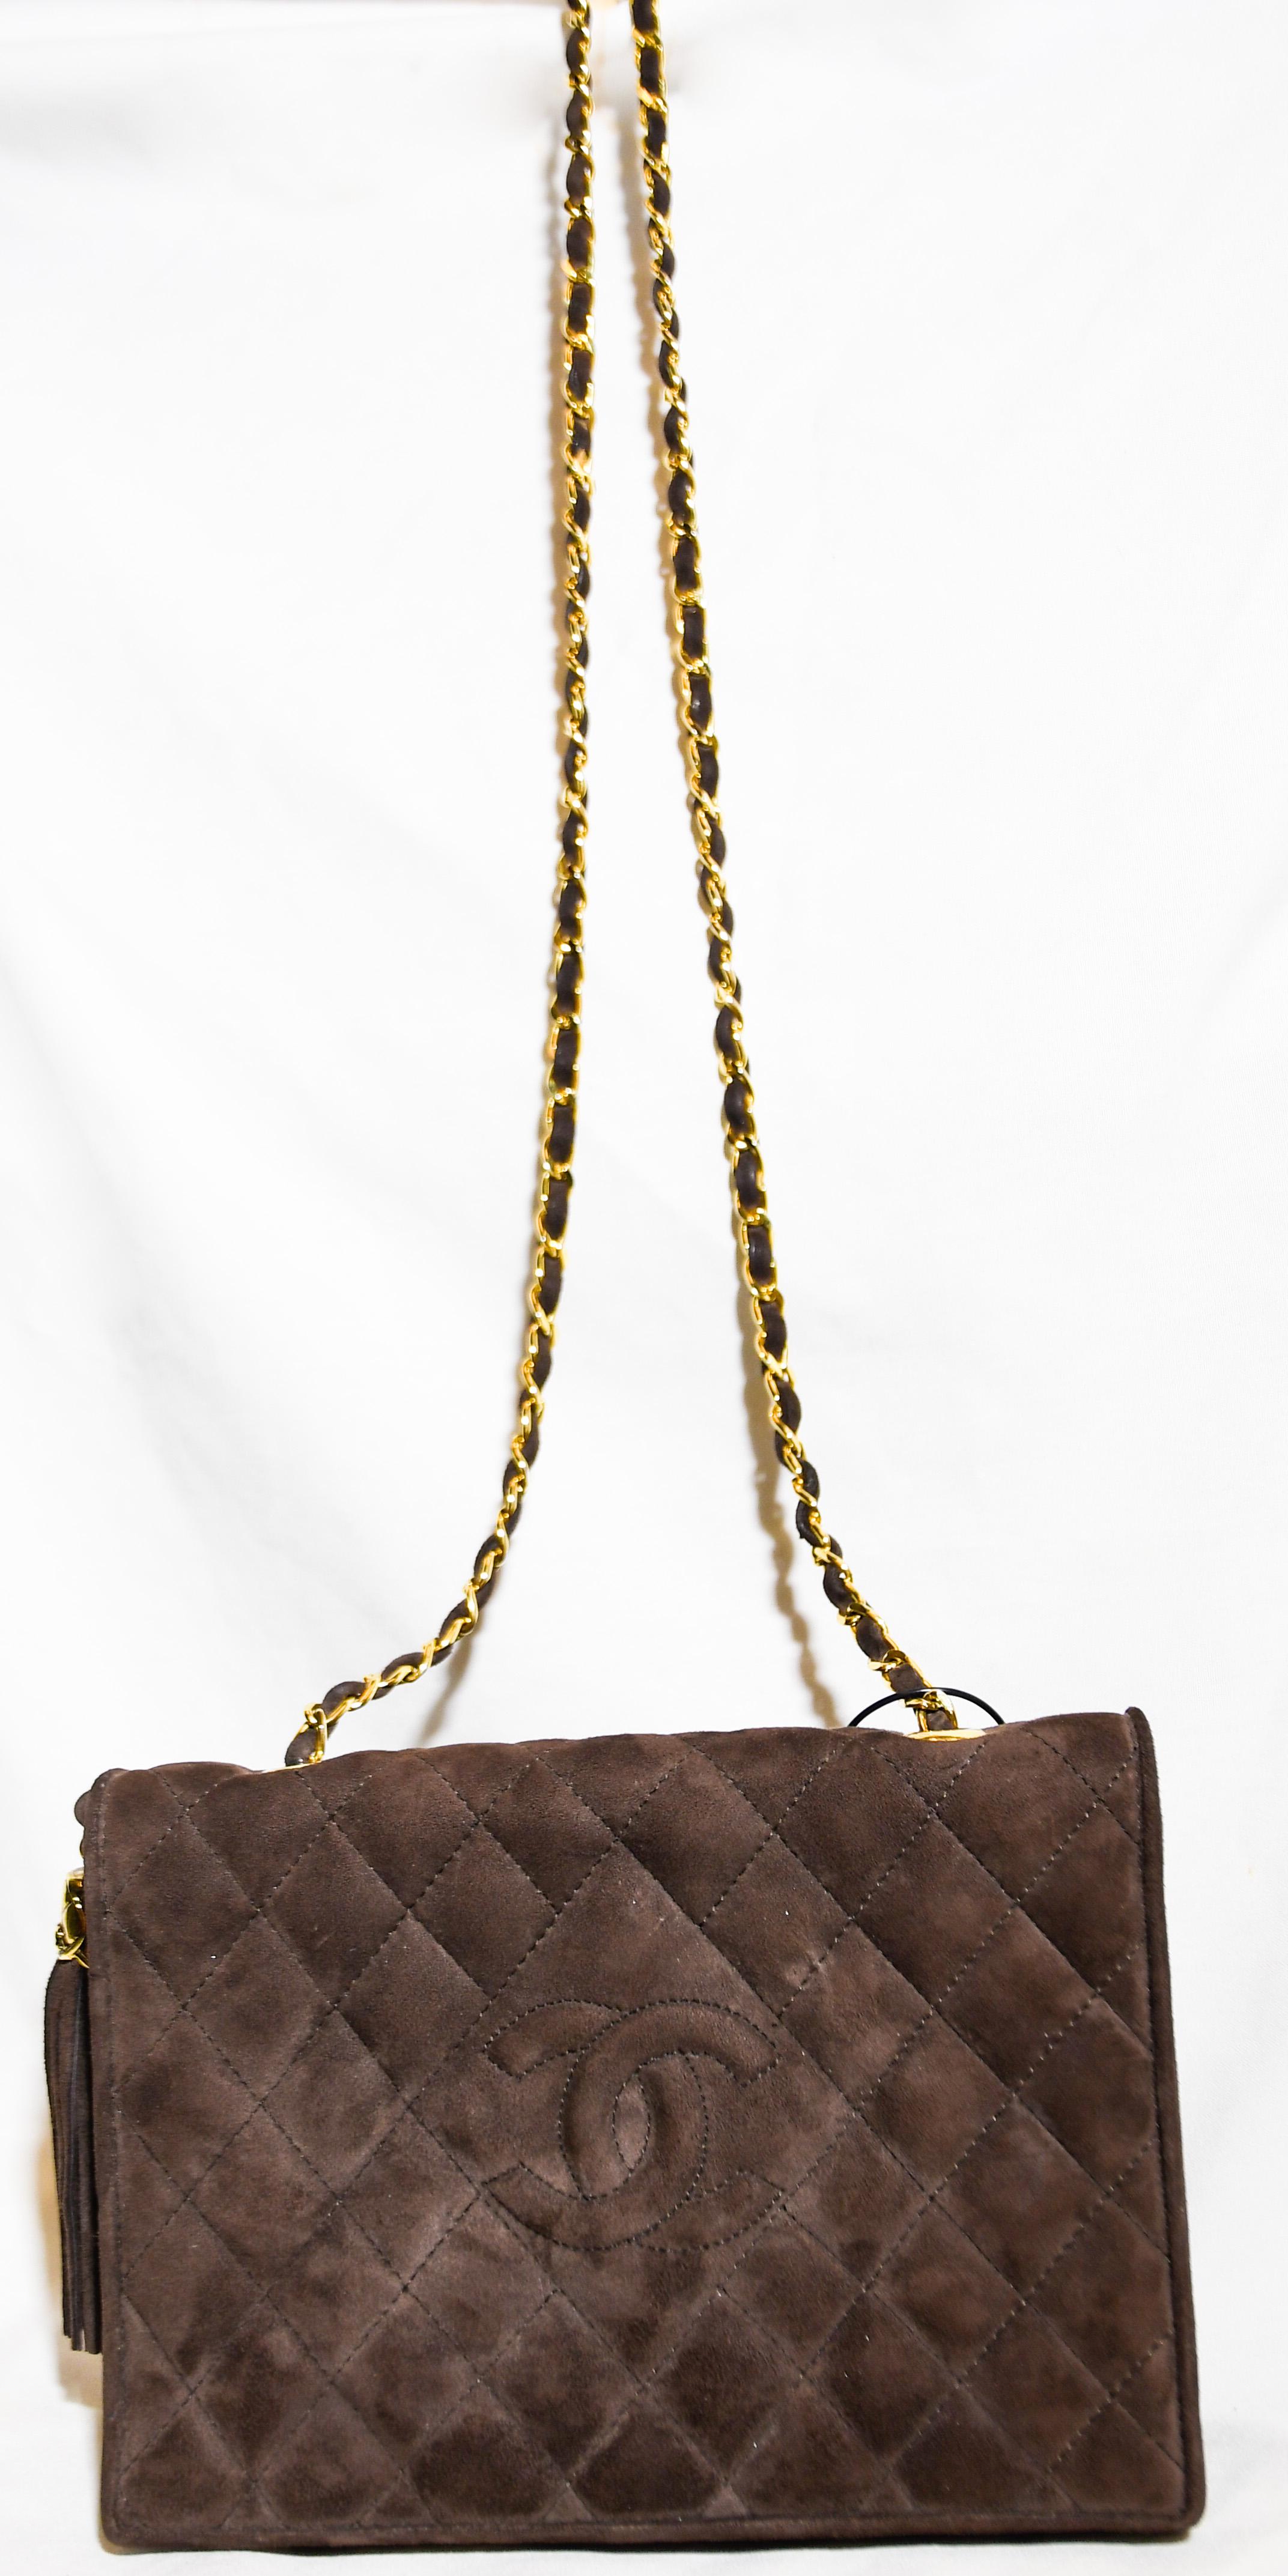 Chanel brown suede 1990's side fringe tassel shoulder bag crafted from brown lambskin and leather and contains a gold tone chain and leather strap.  Bag feature the brand's iconic diamond quilting.  This single flap bag includes a magnetic snap